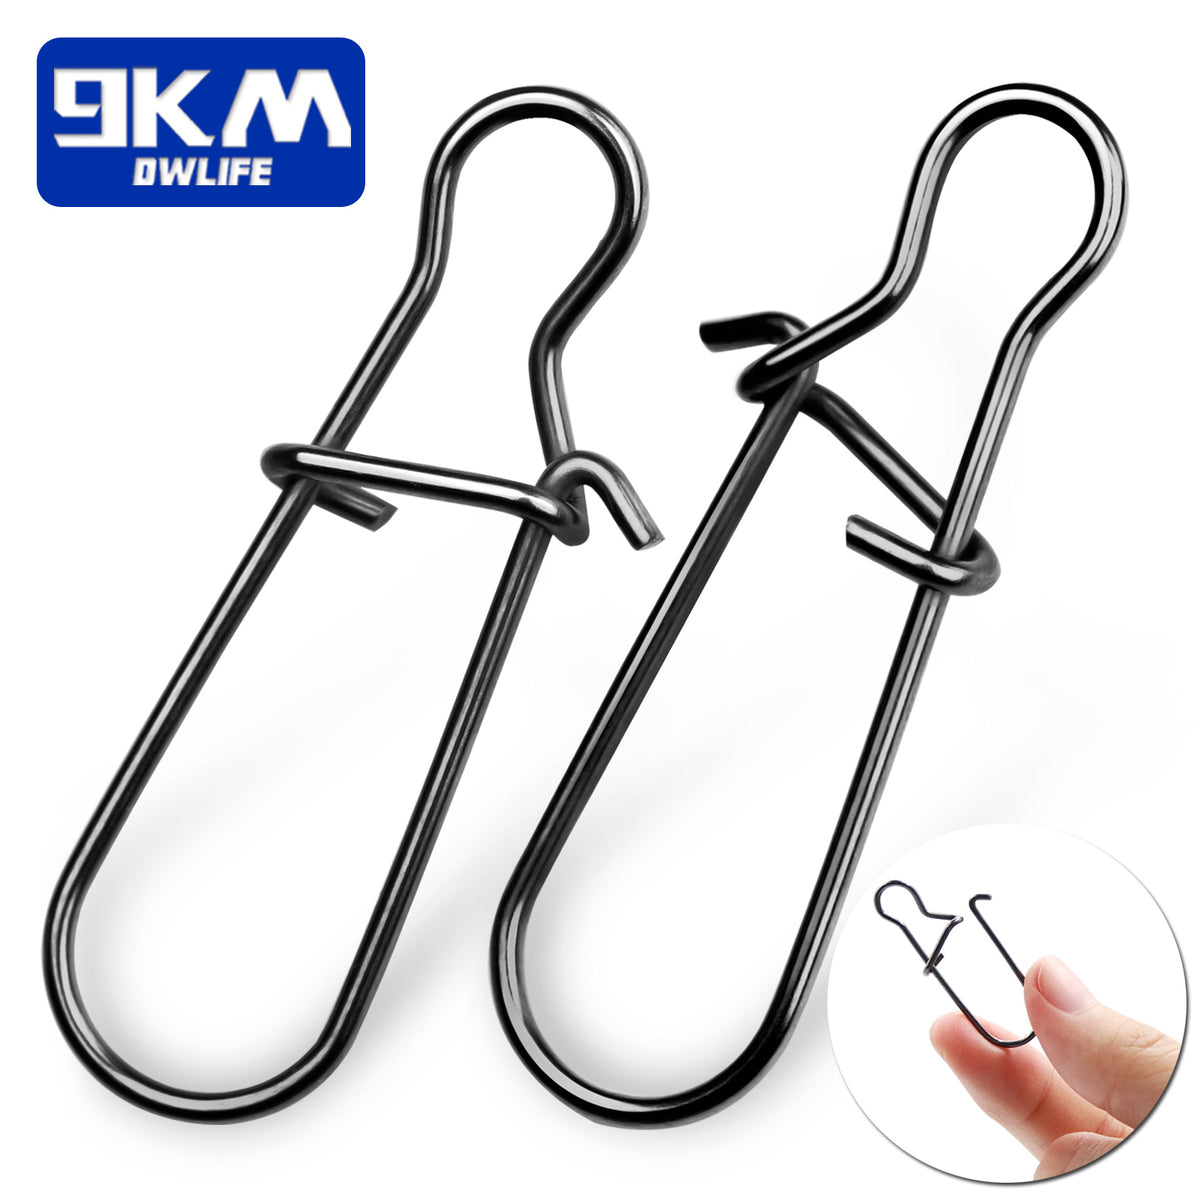 20 Pack Fishing Swivel With Stainless Steel Safety Snap Hook For